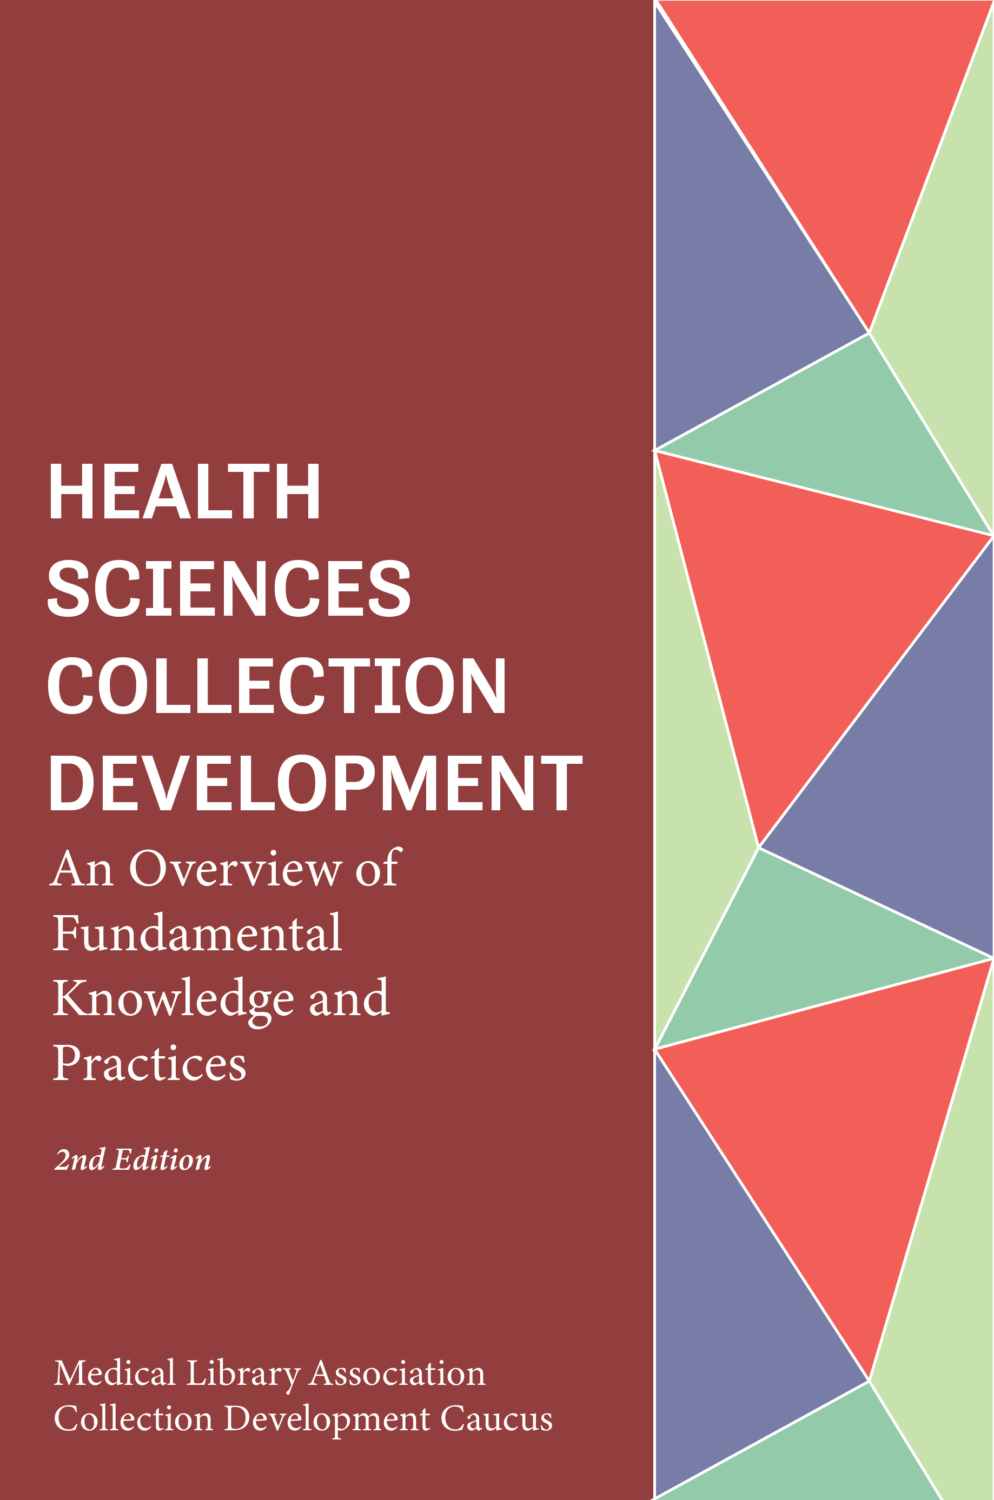 Cover image for Health Sciences Collection Development: An Overview of Fundamental Knowledge and Practices (2nd Edition)